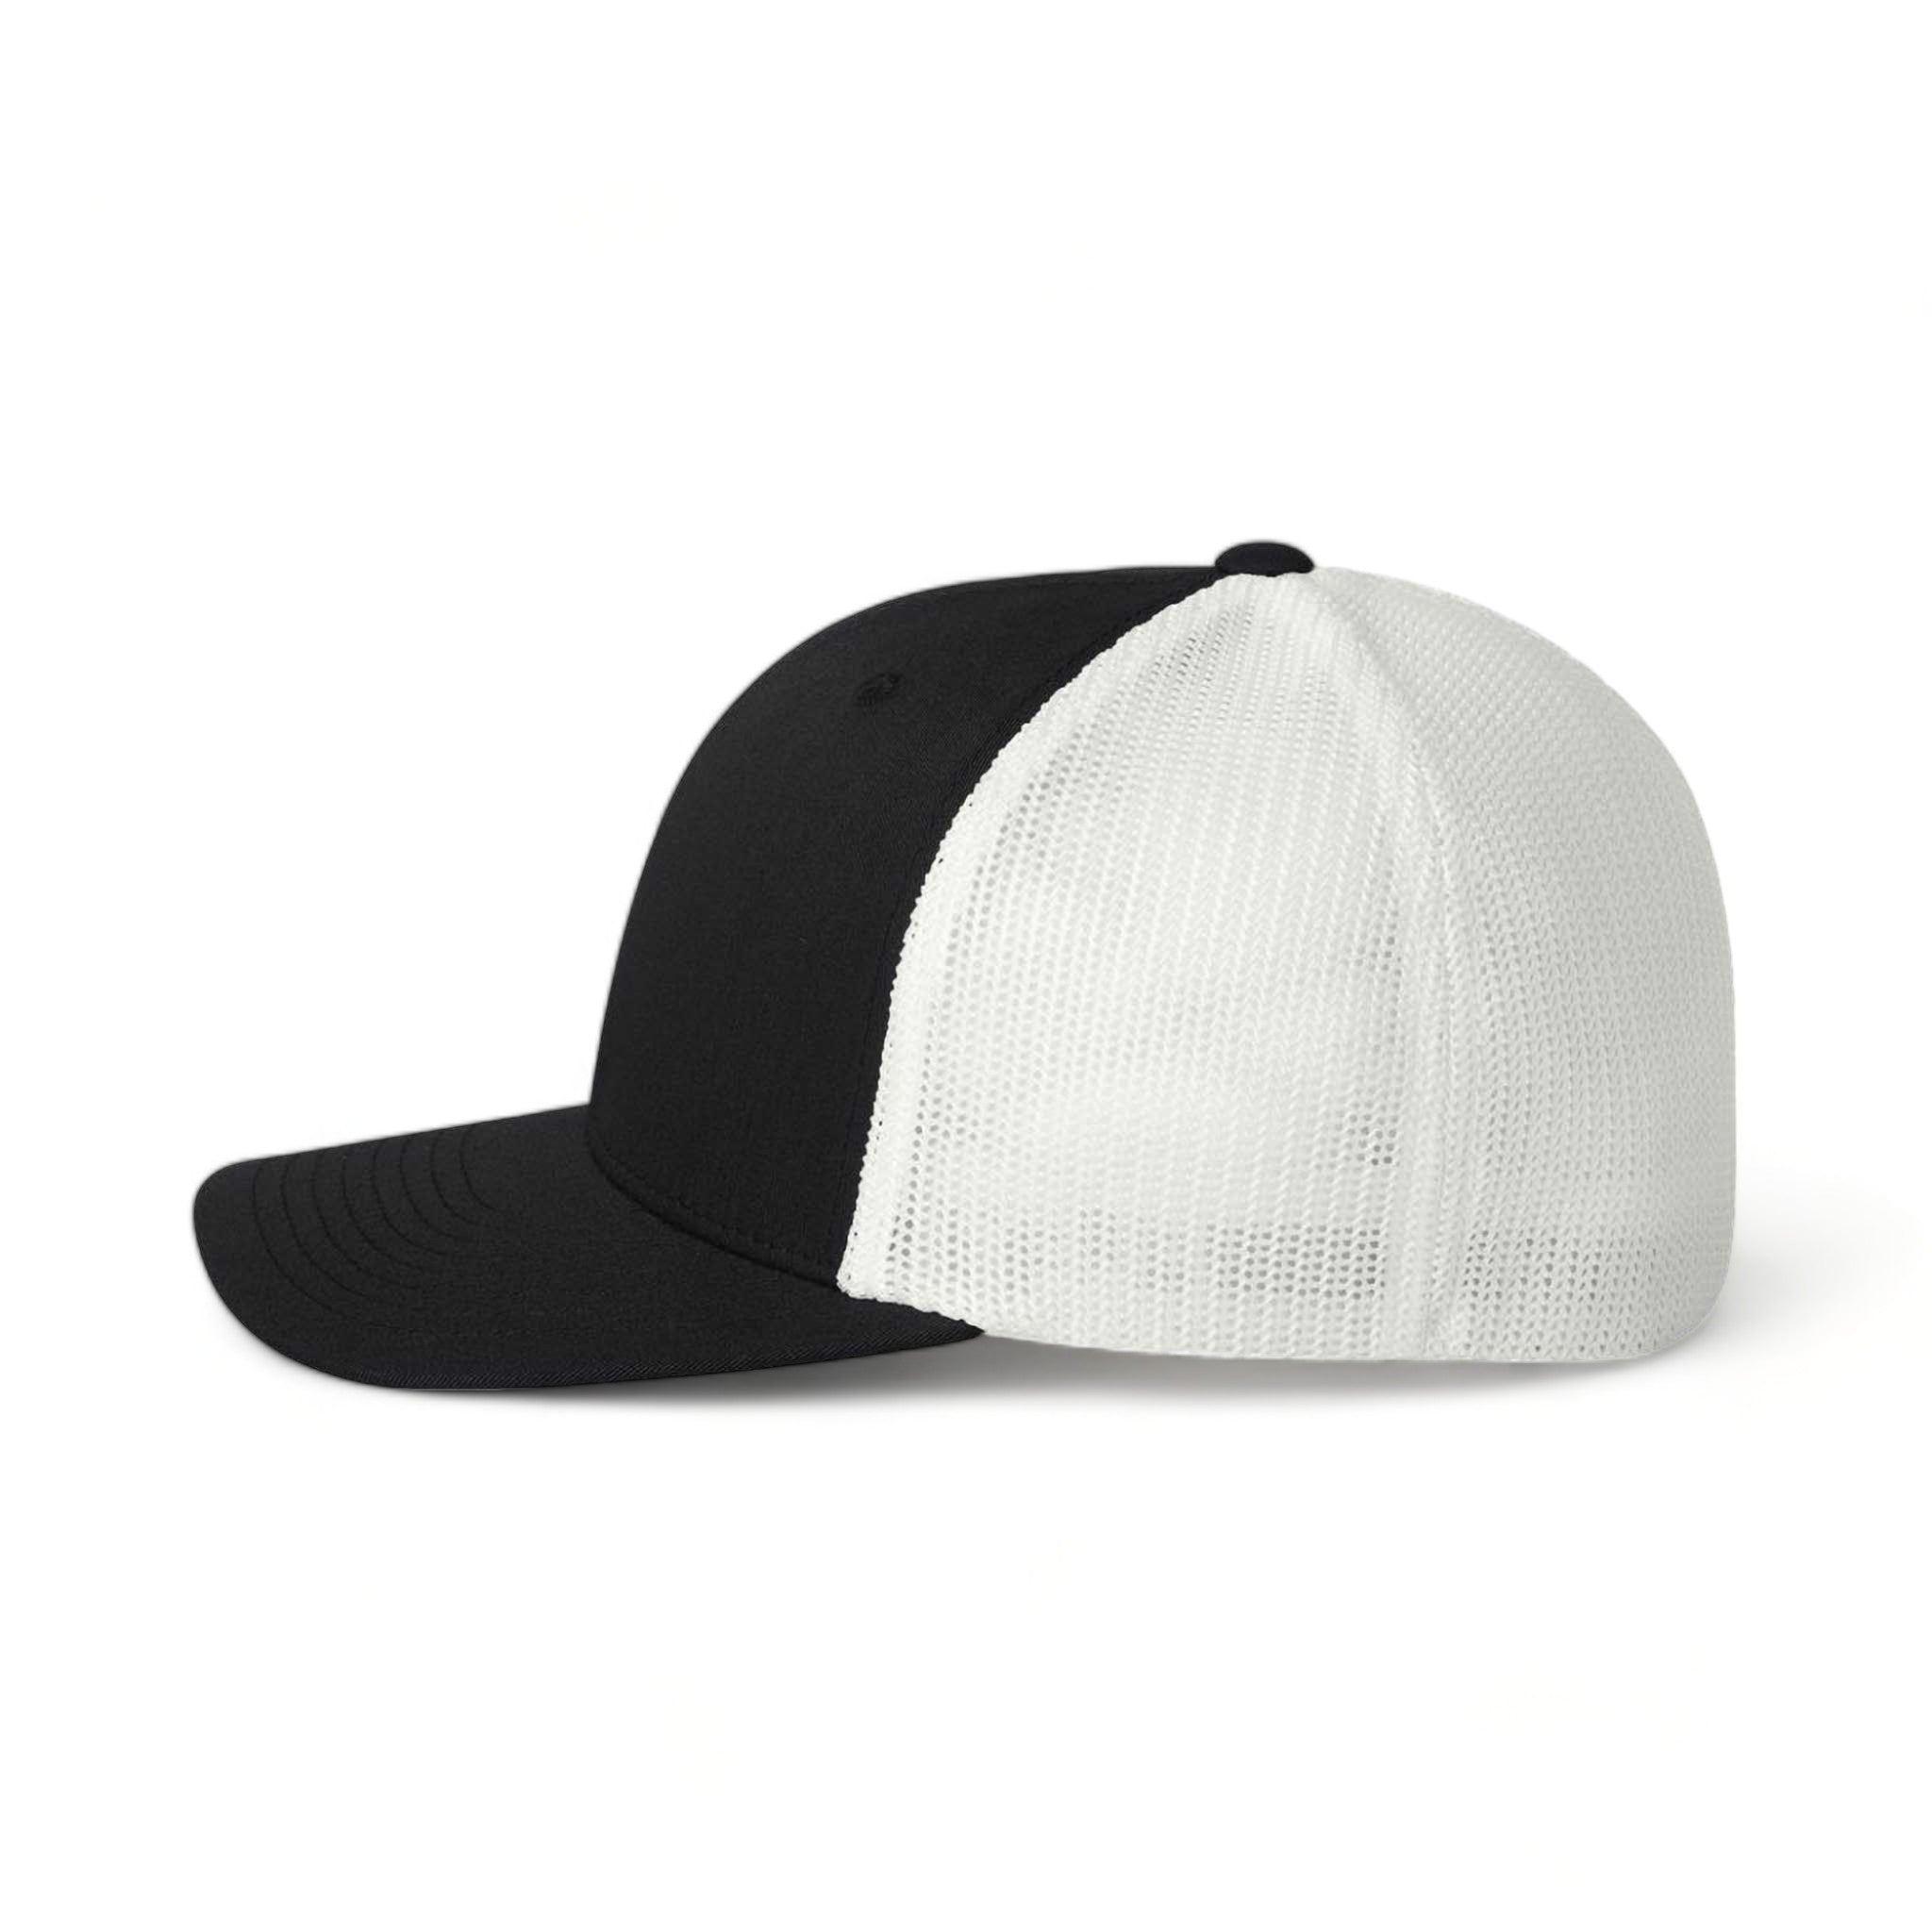 Side view of Flexfit 6511 custom hat in black and white